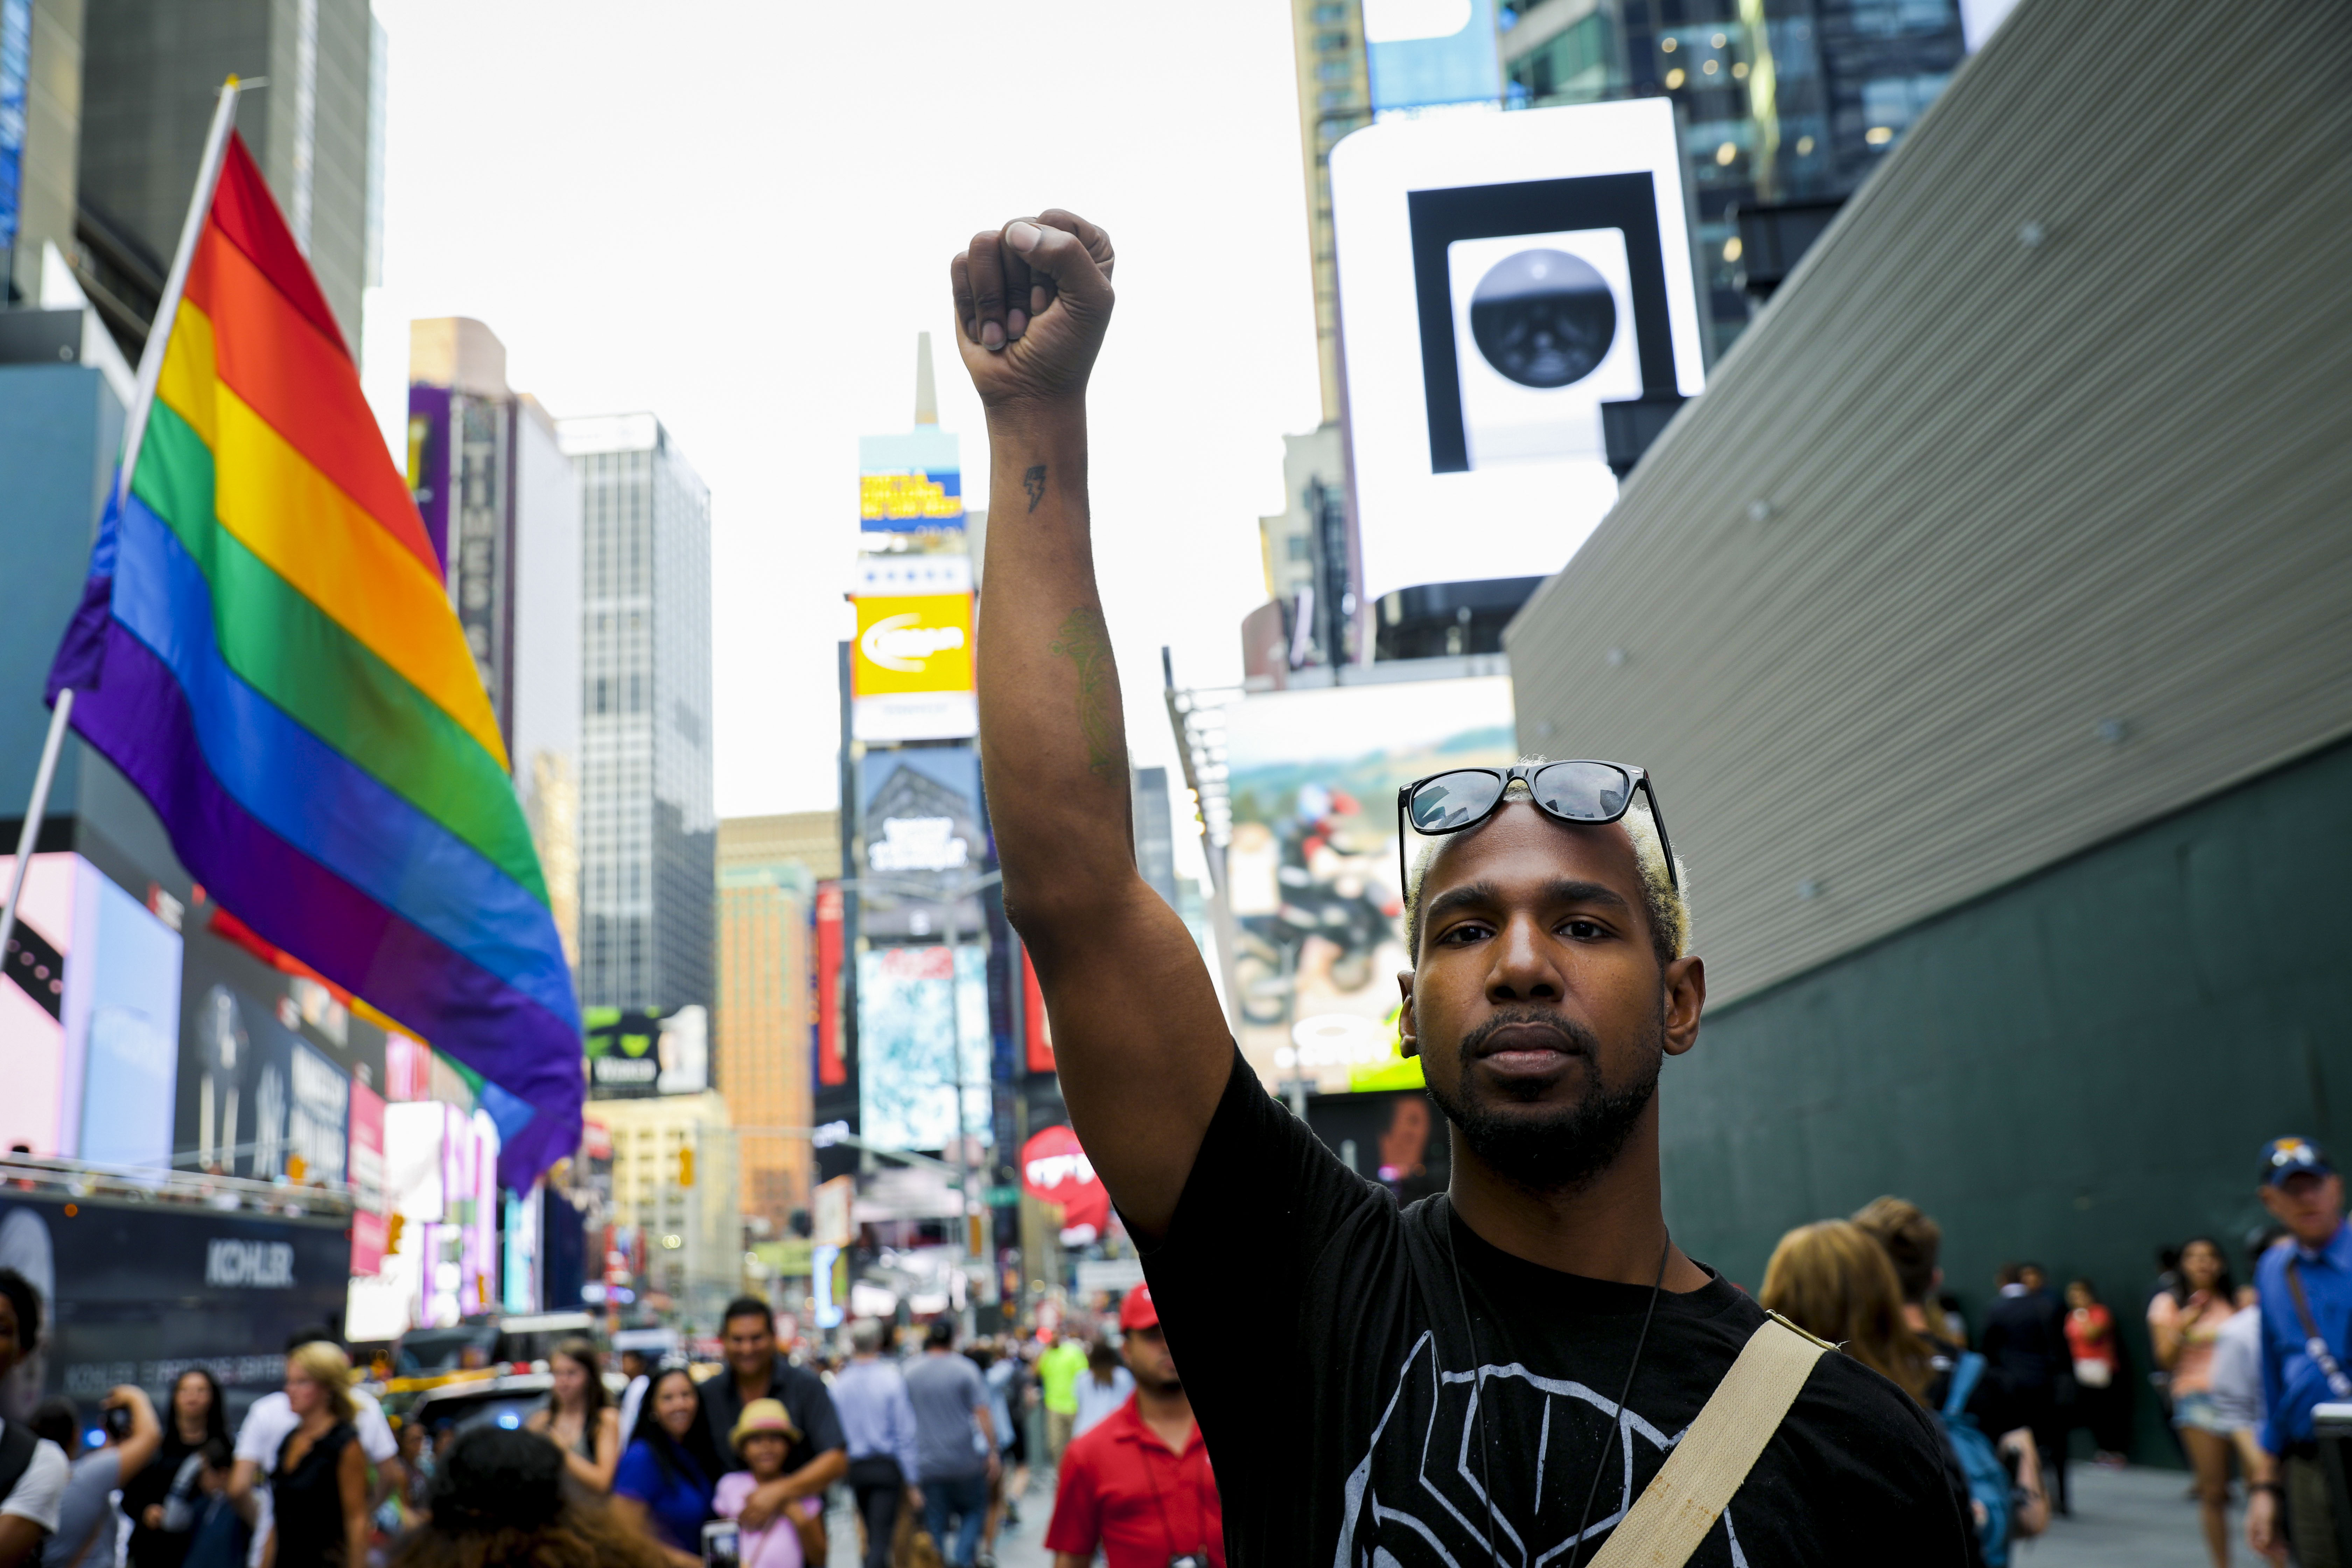 [VIDEO] New Yorkers Push Back Against Trump’s Tweeted Ban on Trans People in the Military